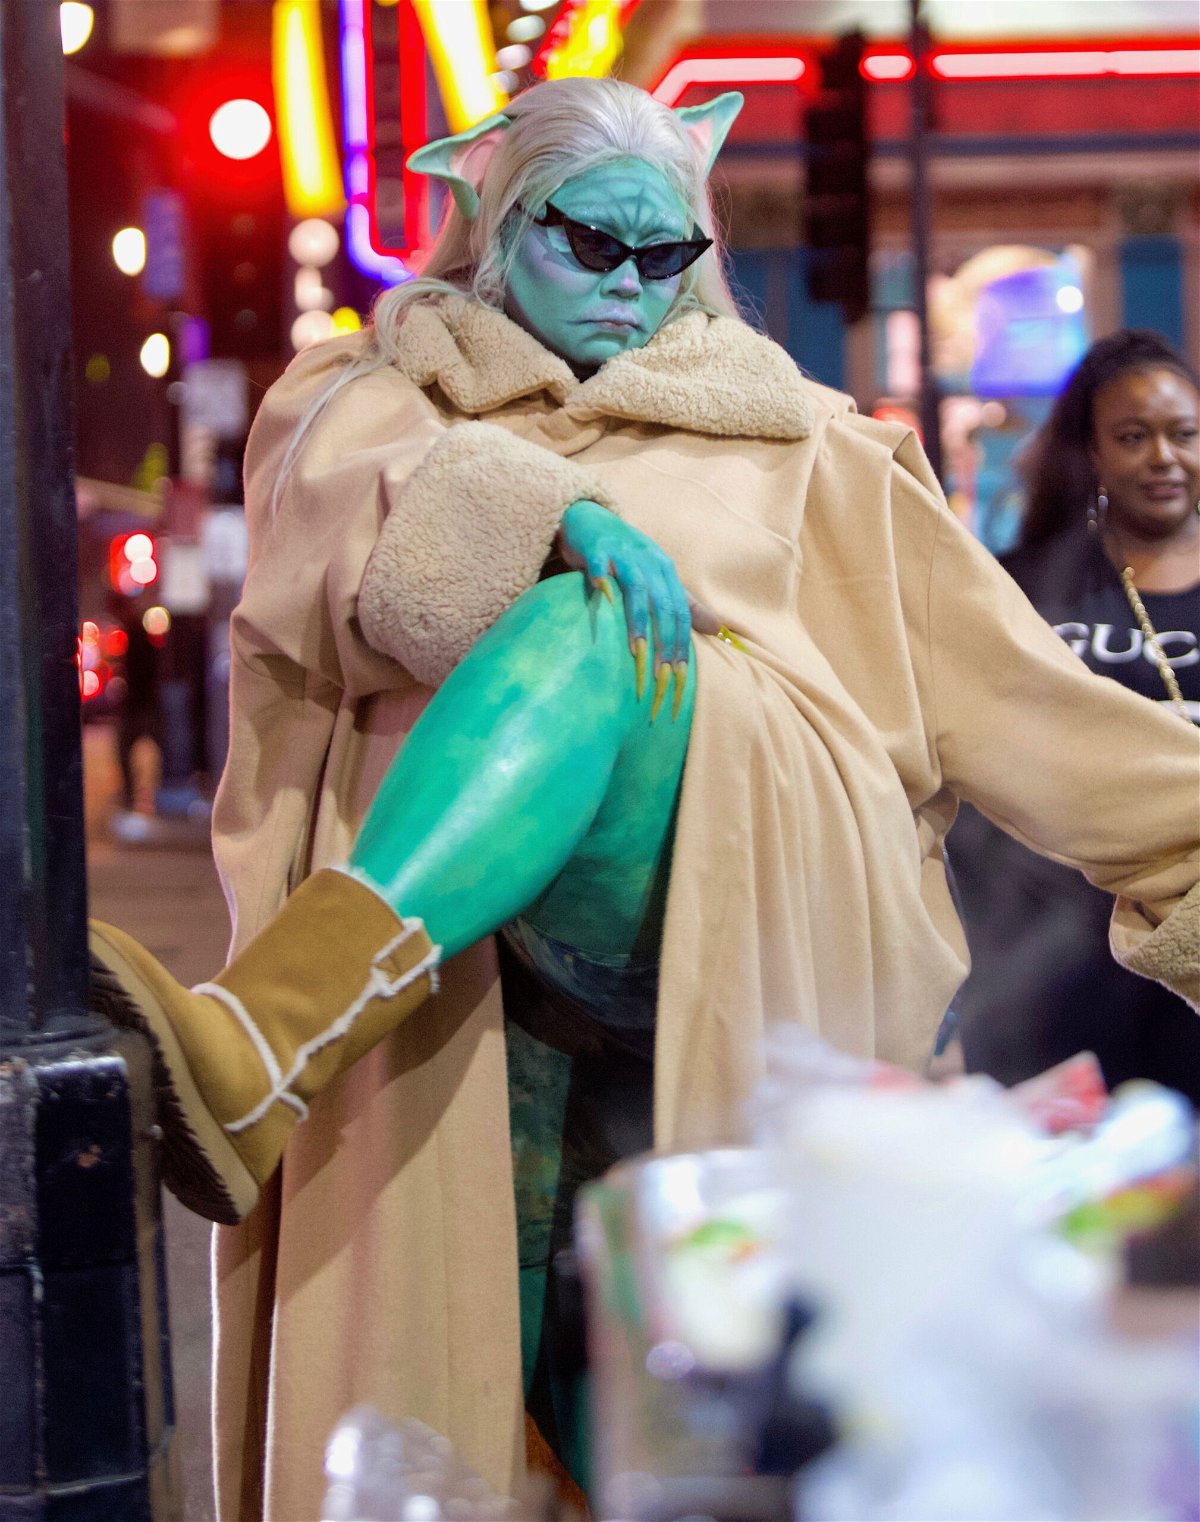 <i>DIGGZY/Shutterstock</i><br/>Lizzo was spotted out in Hollywood on Friday night